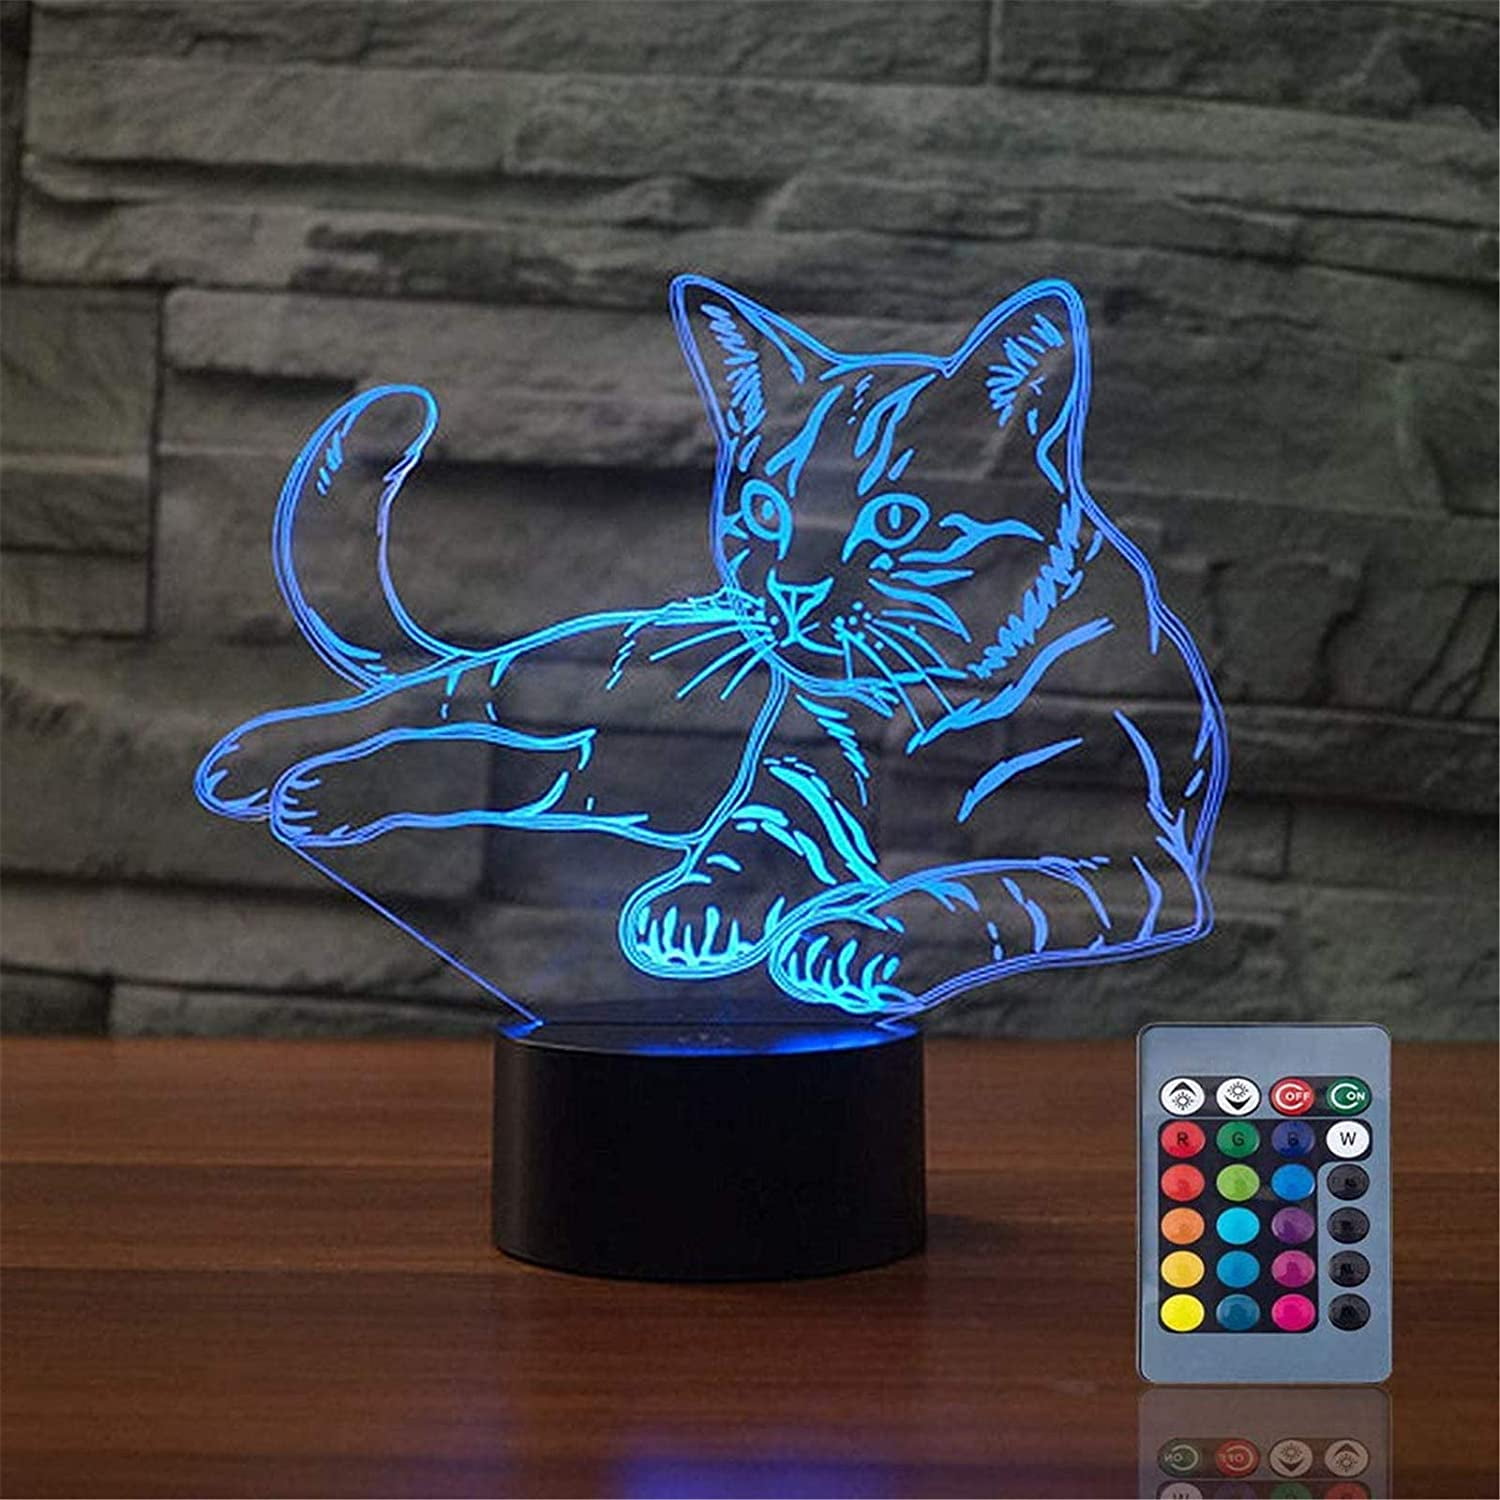 3D LED Night Light Smurf Touch Swift Table Desk Bed Lamp 7 Color RGB Kids Gifts 